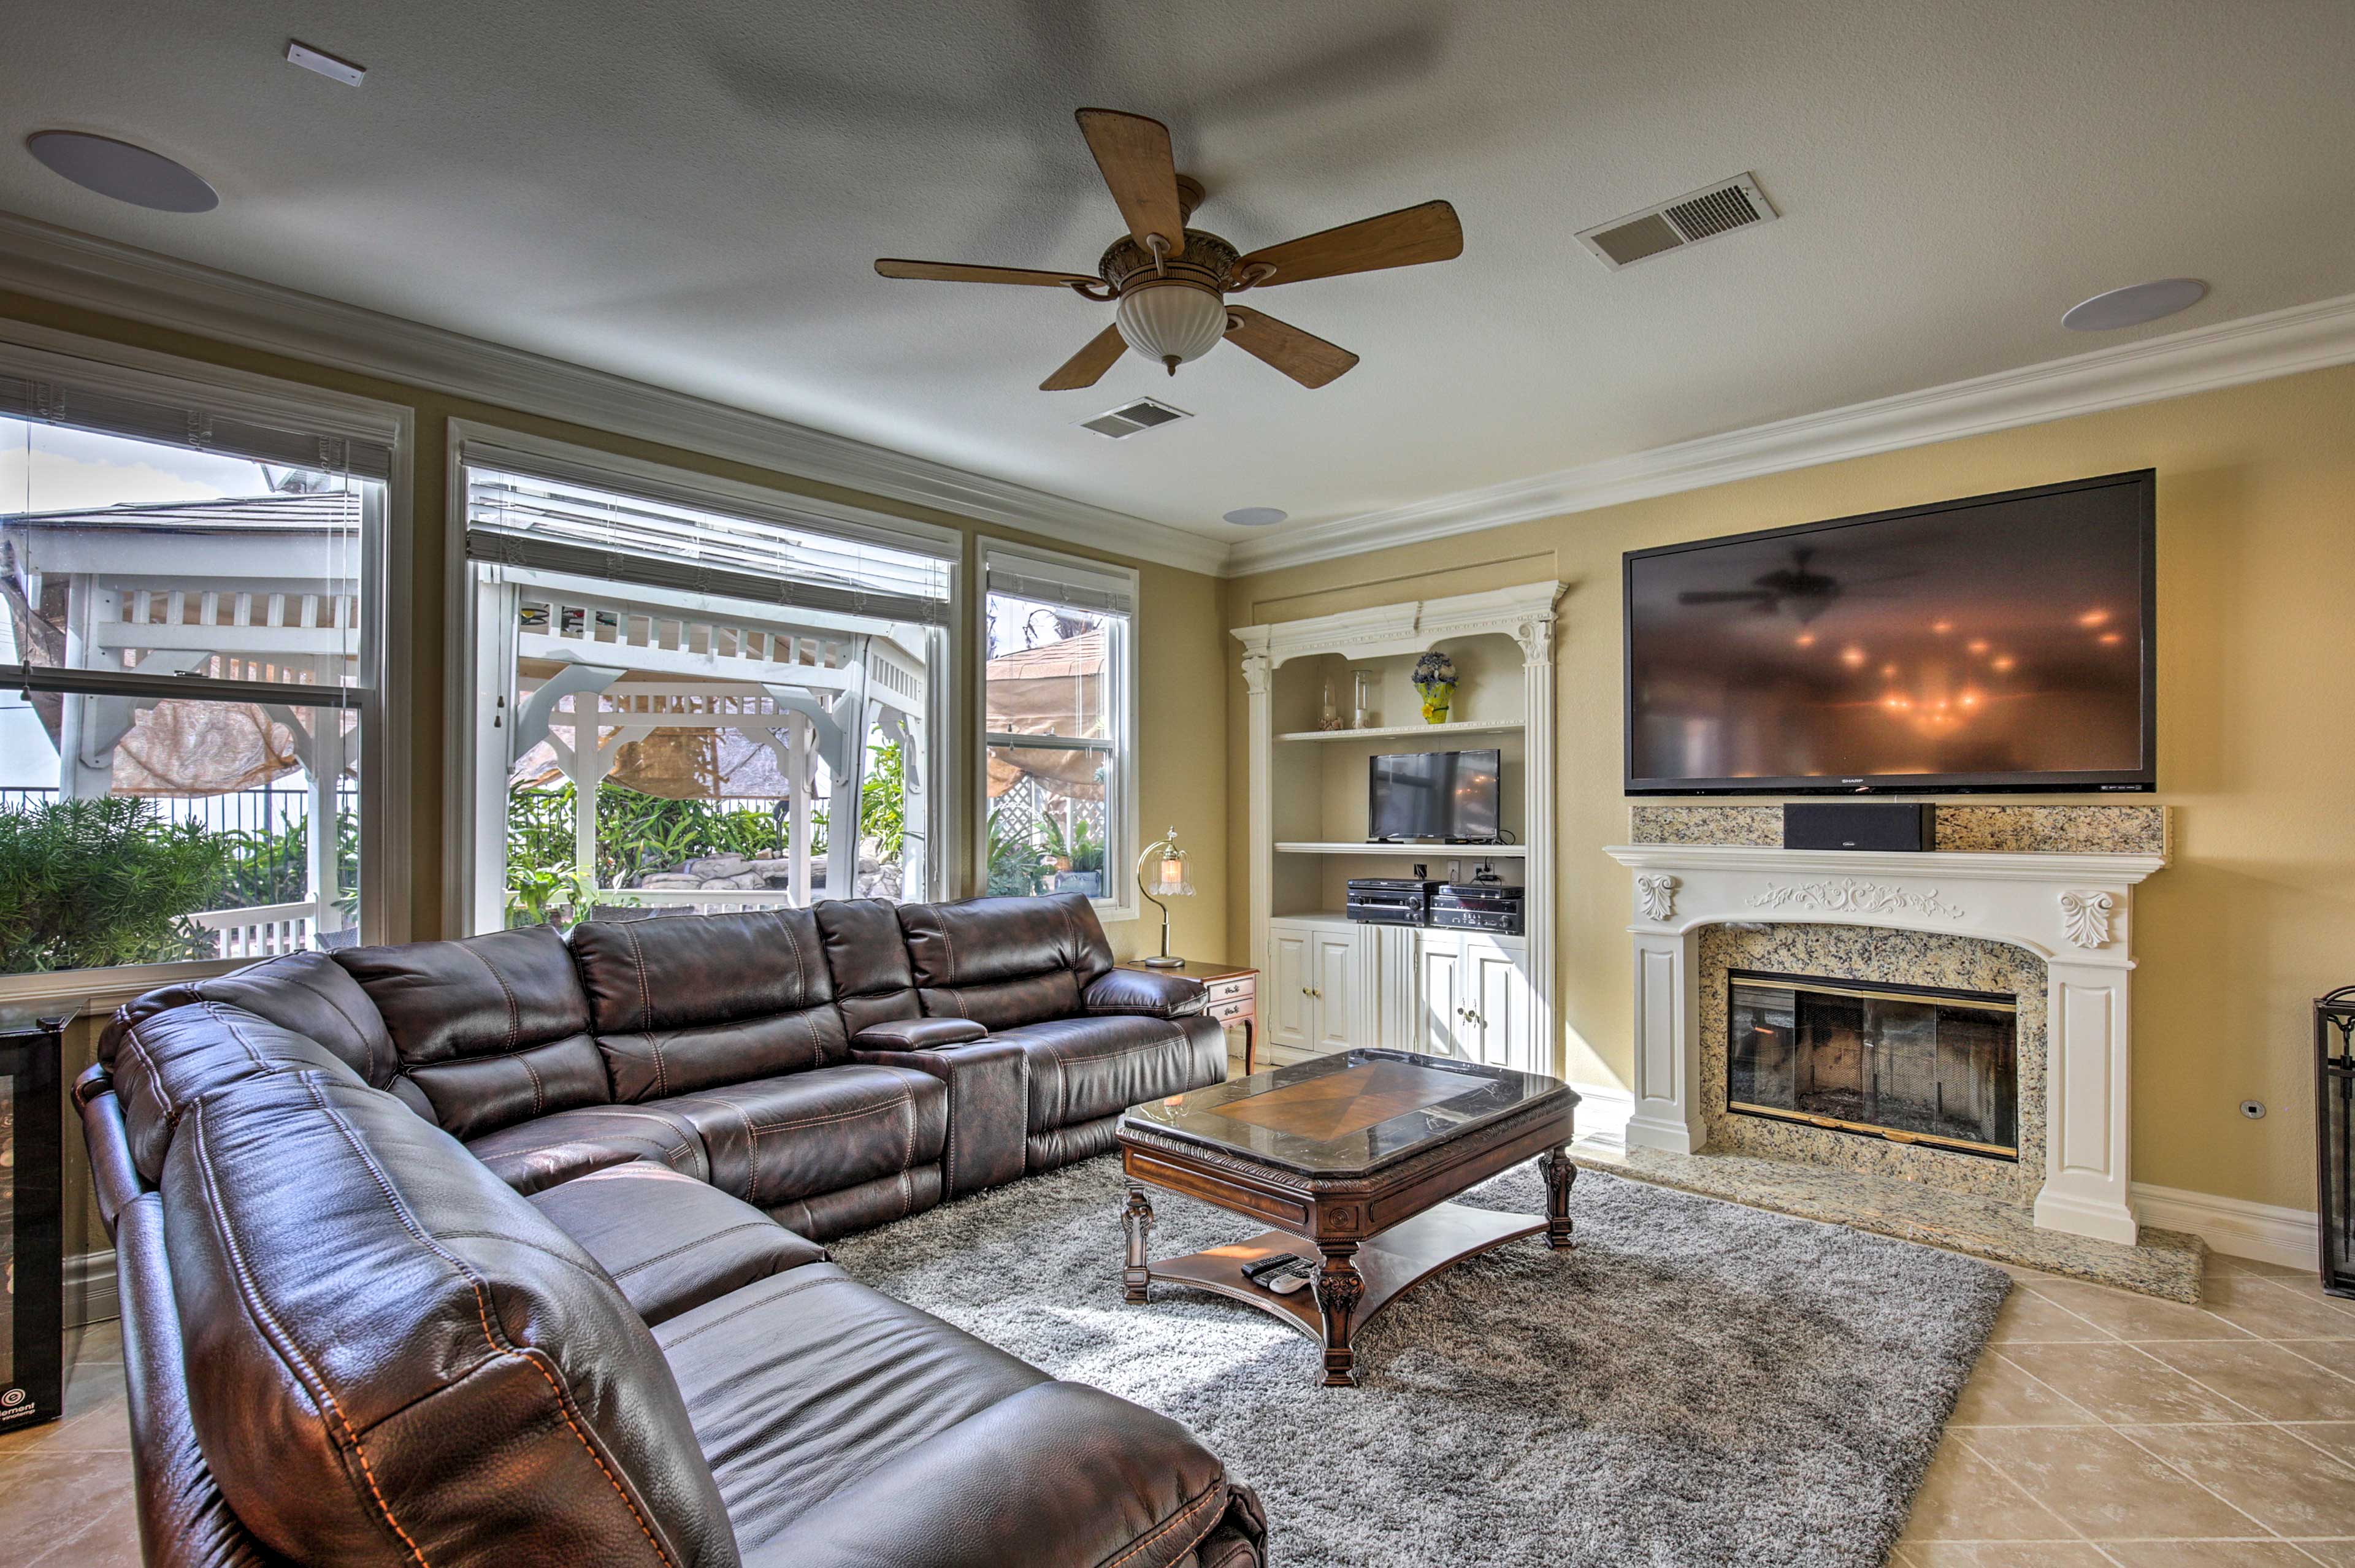 Living Room | Flat-Screen Cable TV | Decorative Fireplace | Central A/C & Heat